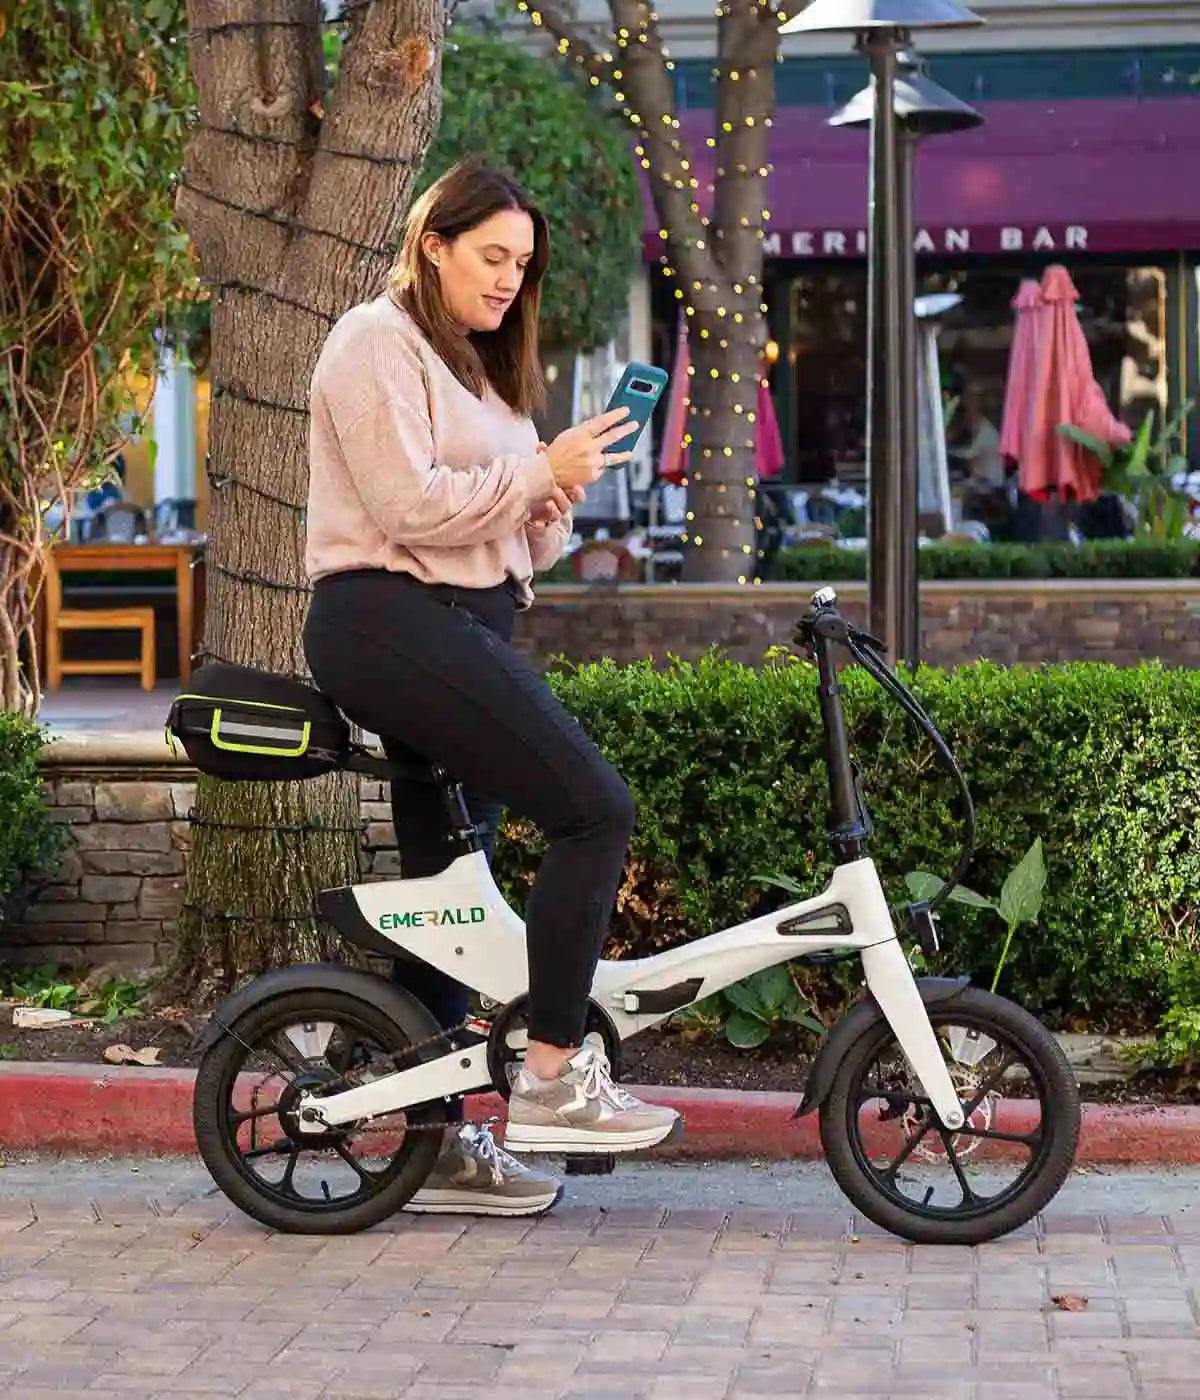 Woman stopping to check her phone on her ebike.